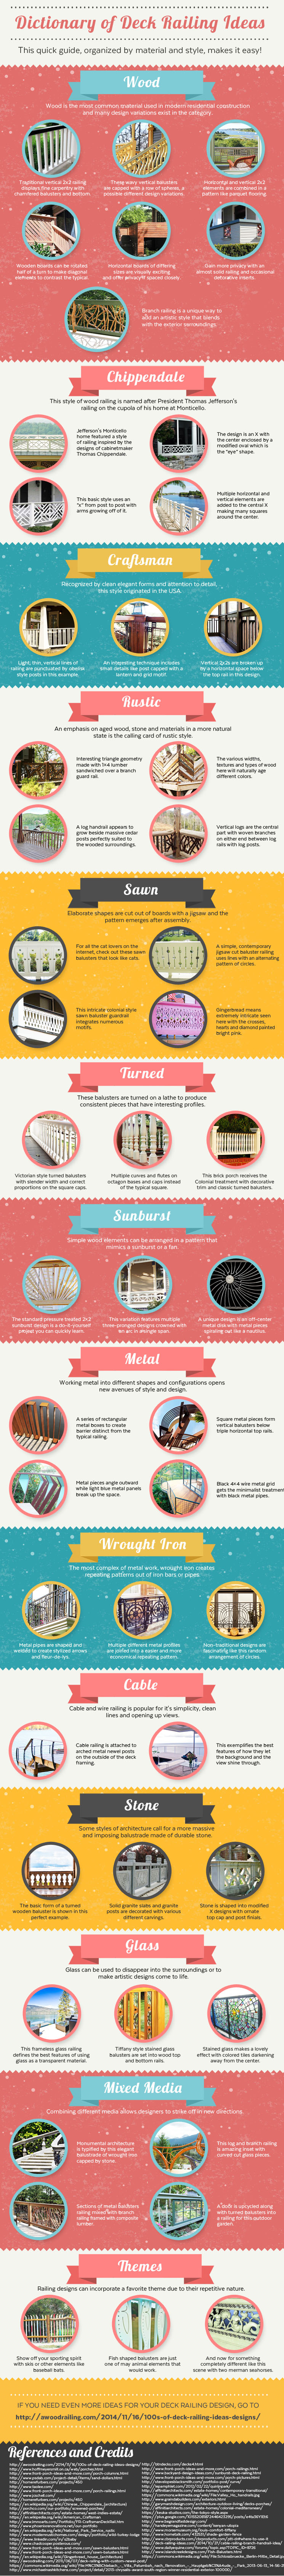 Guide to Deck Railing Designs